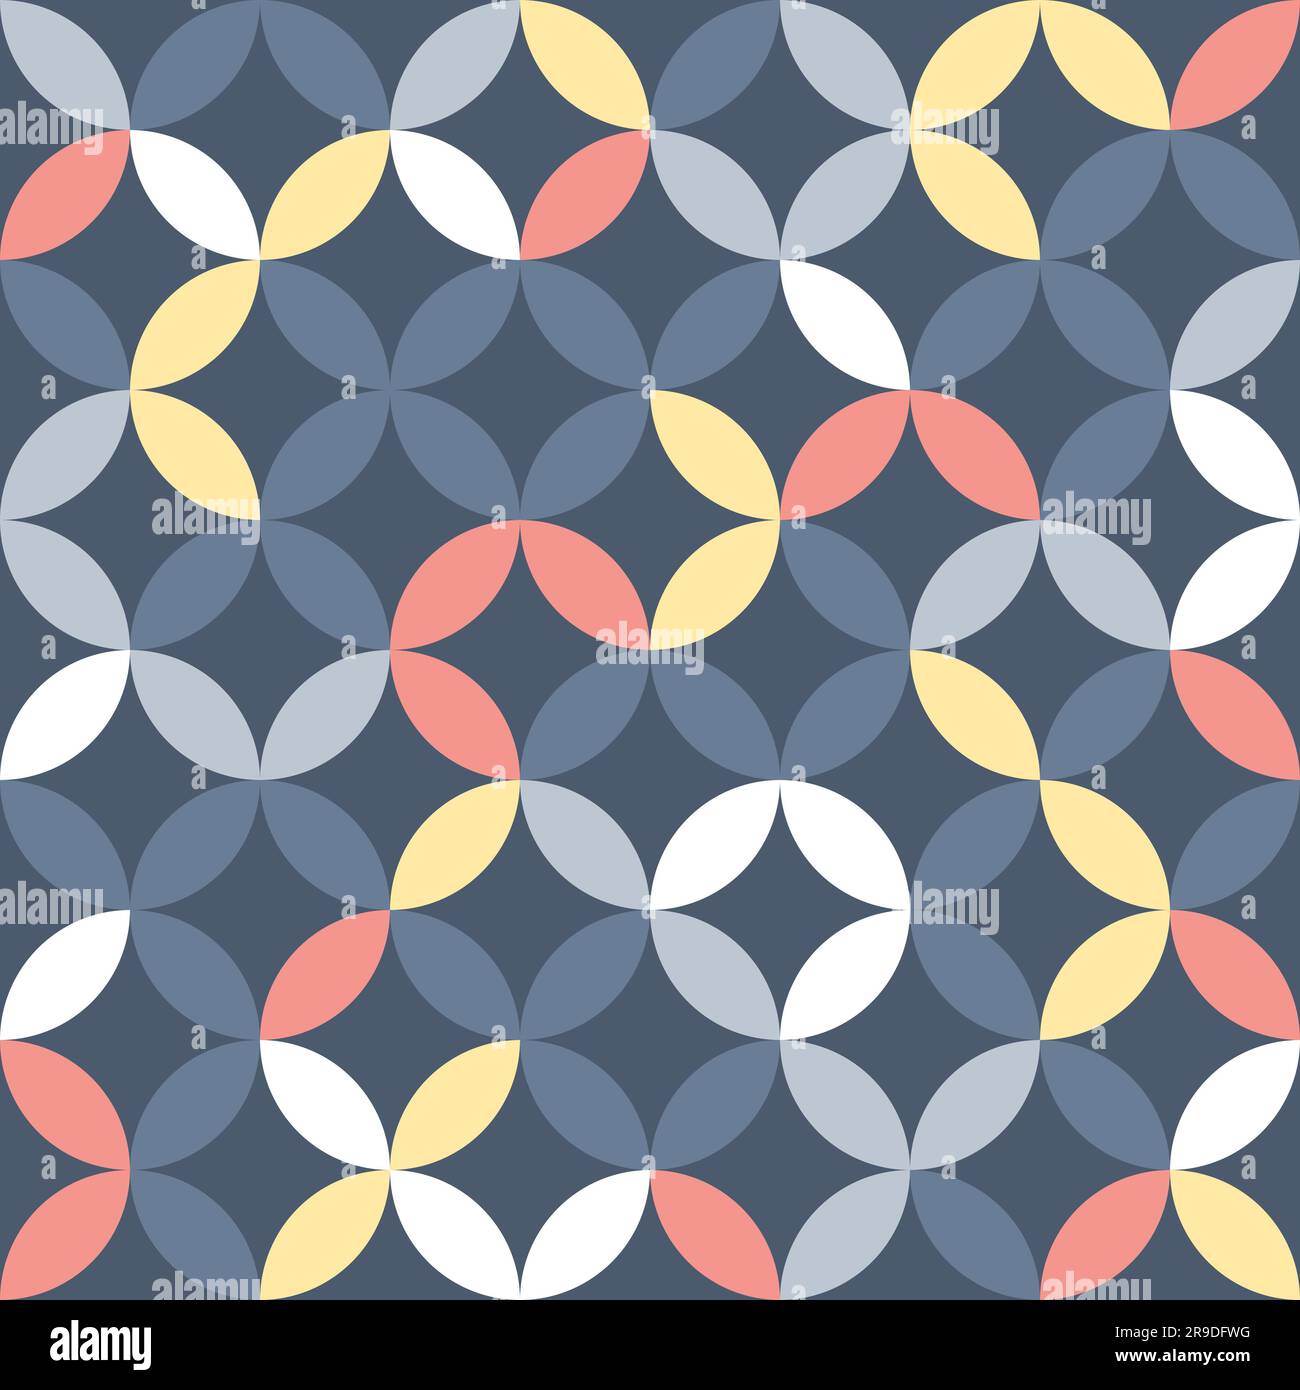 Cool overlapping circles seamless texture. Retro pastel ovals and circles vector geometric fashion pattern. Colorful fashion print. Stock Photo